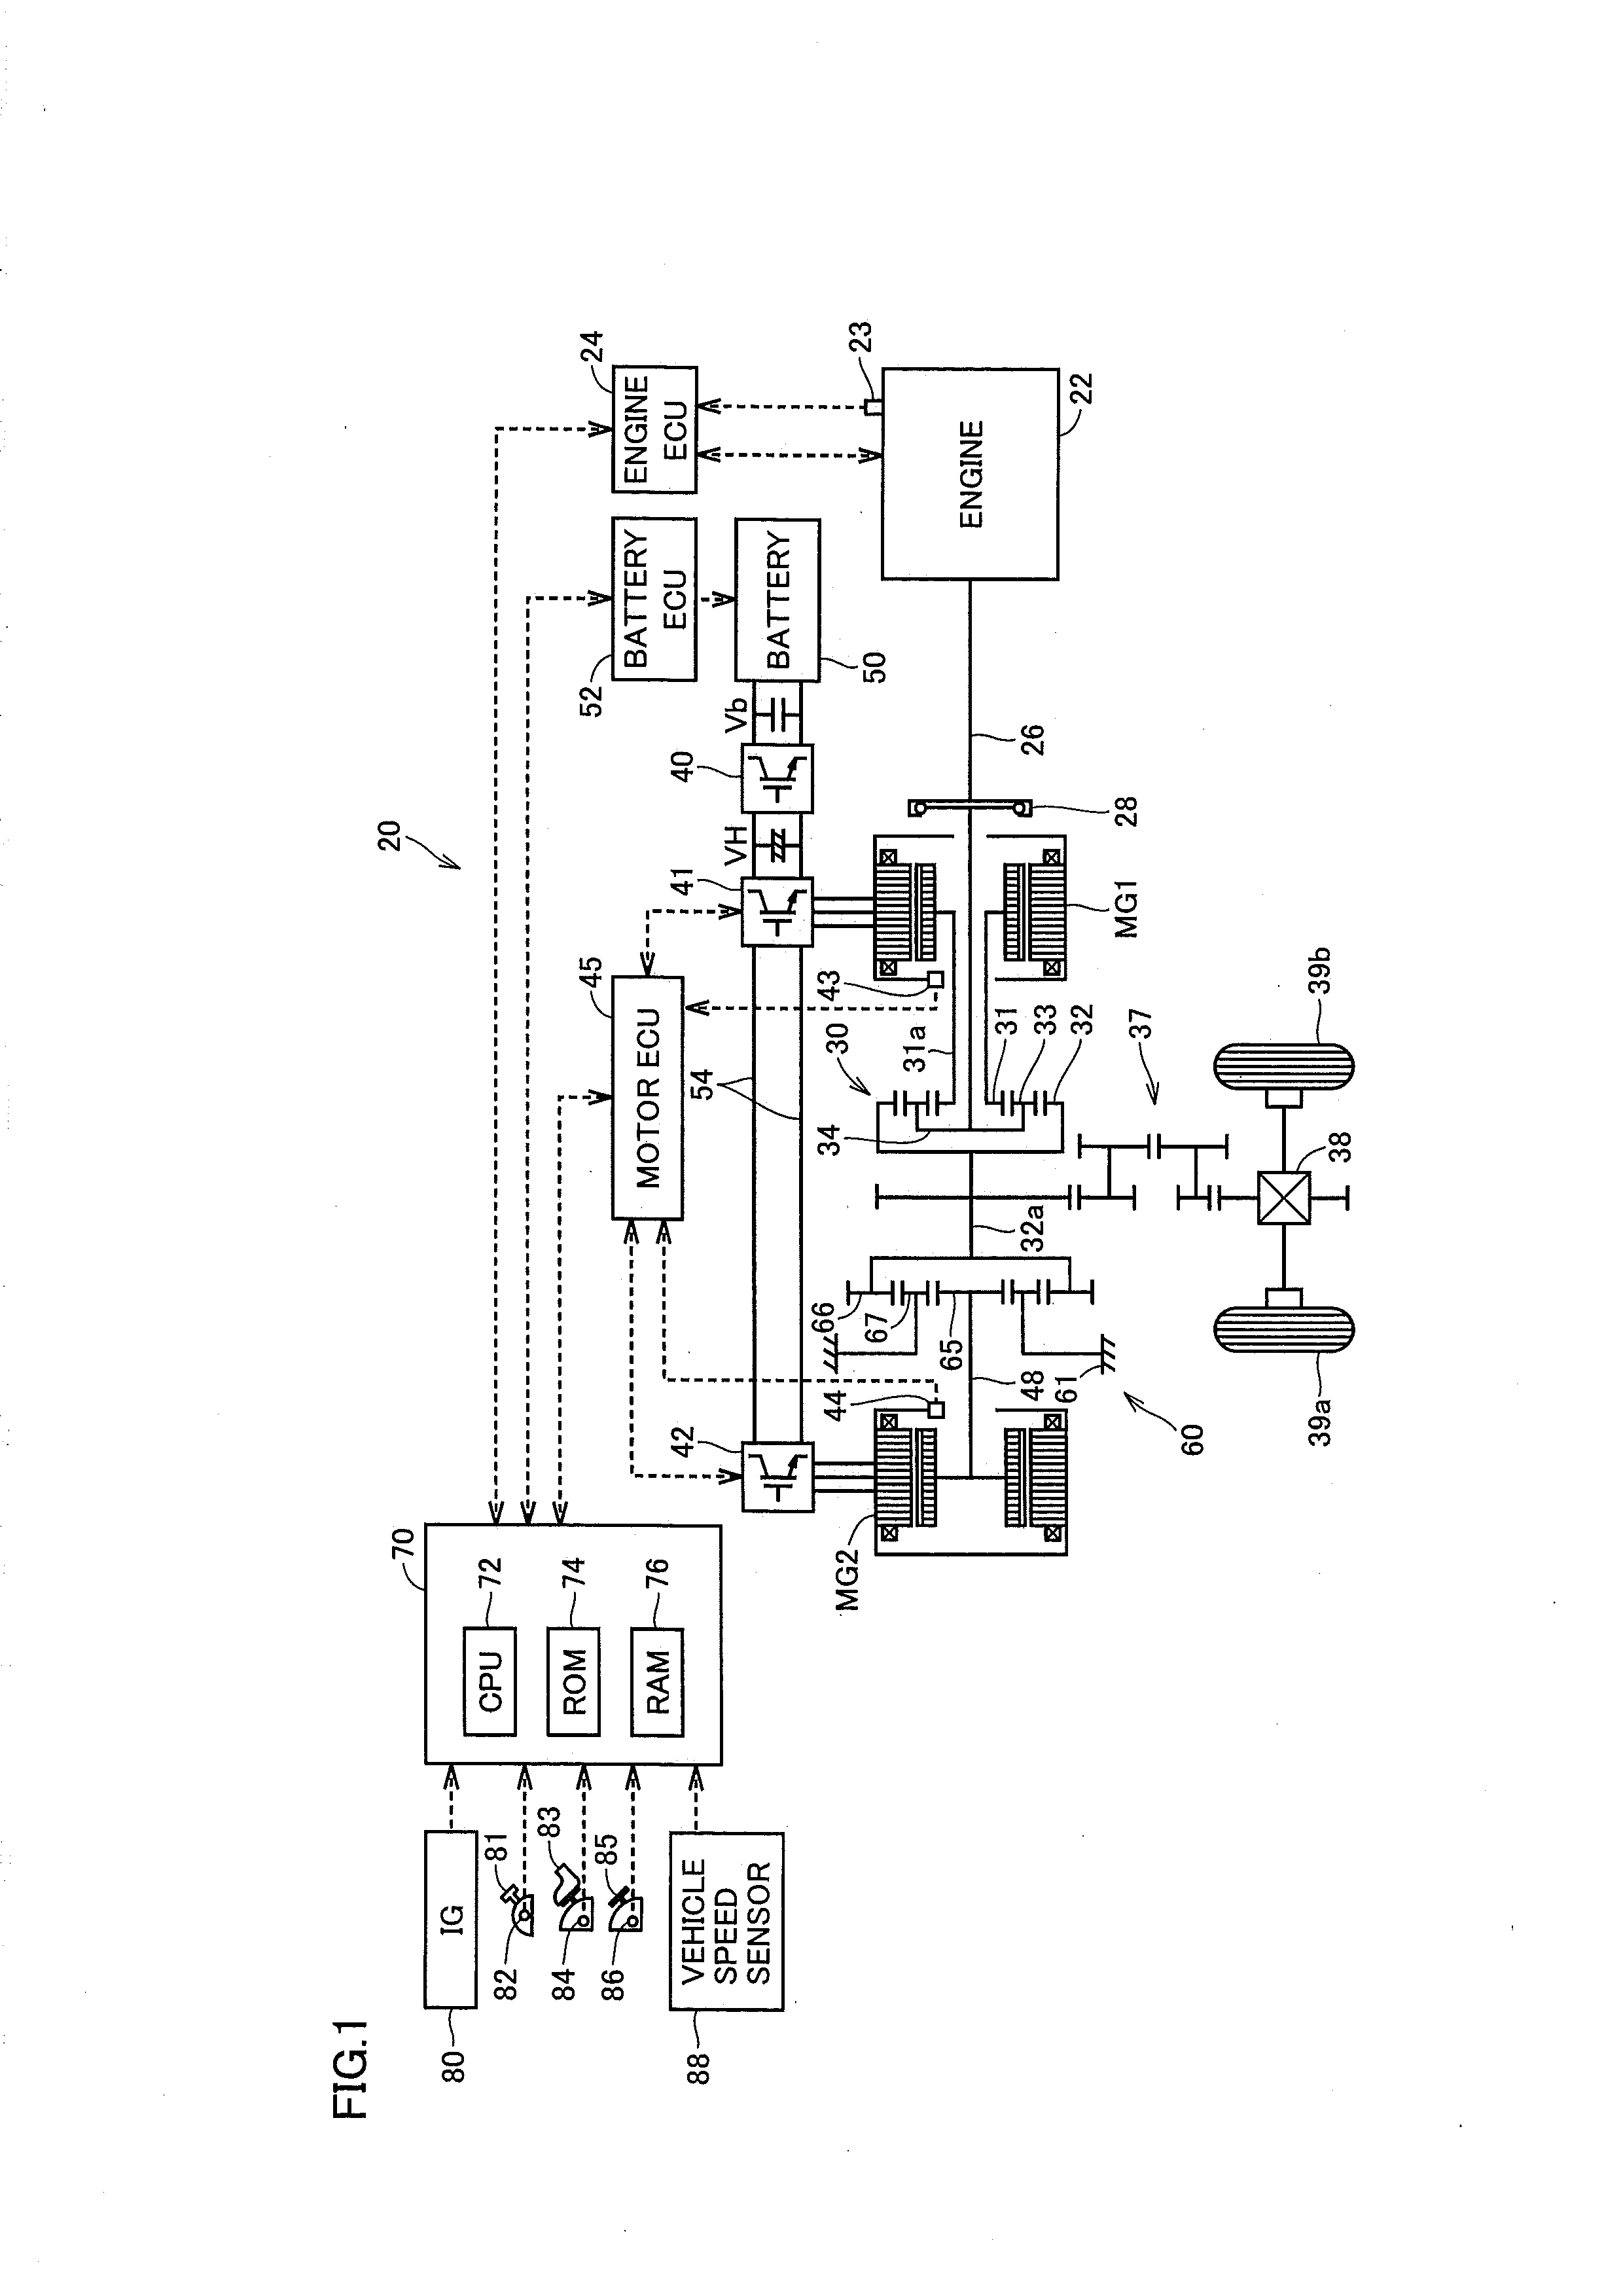 Electrically-powered vehicle and method for controlling the same